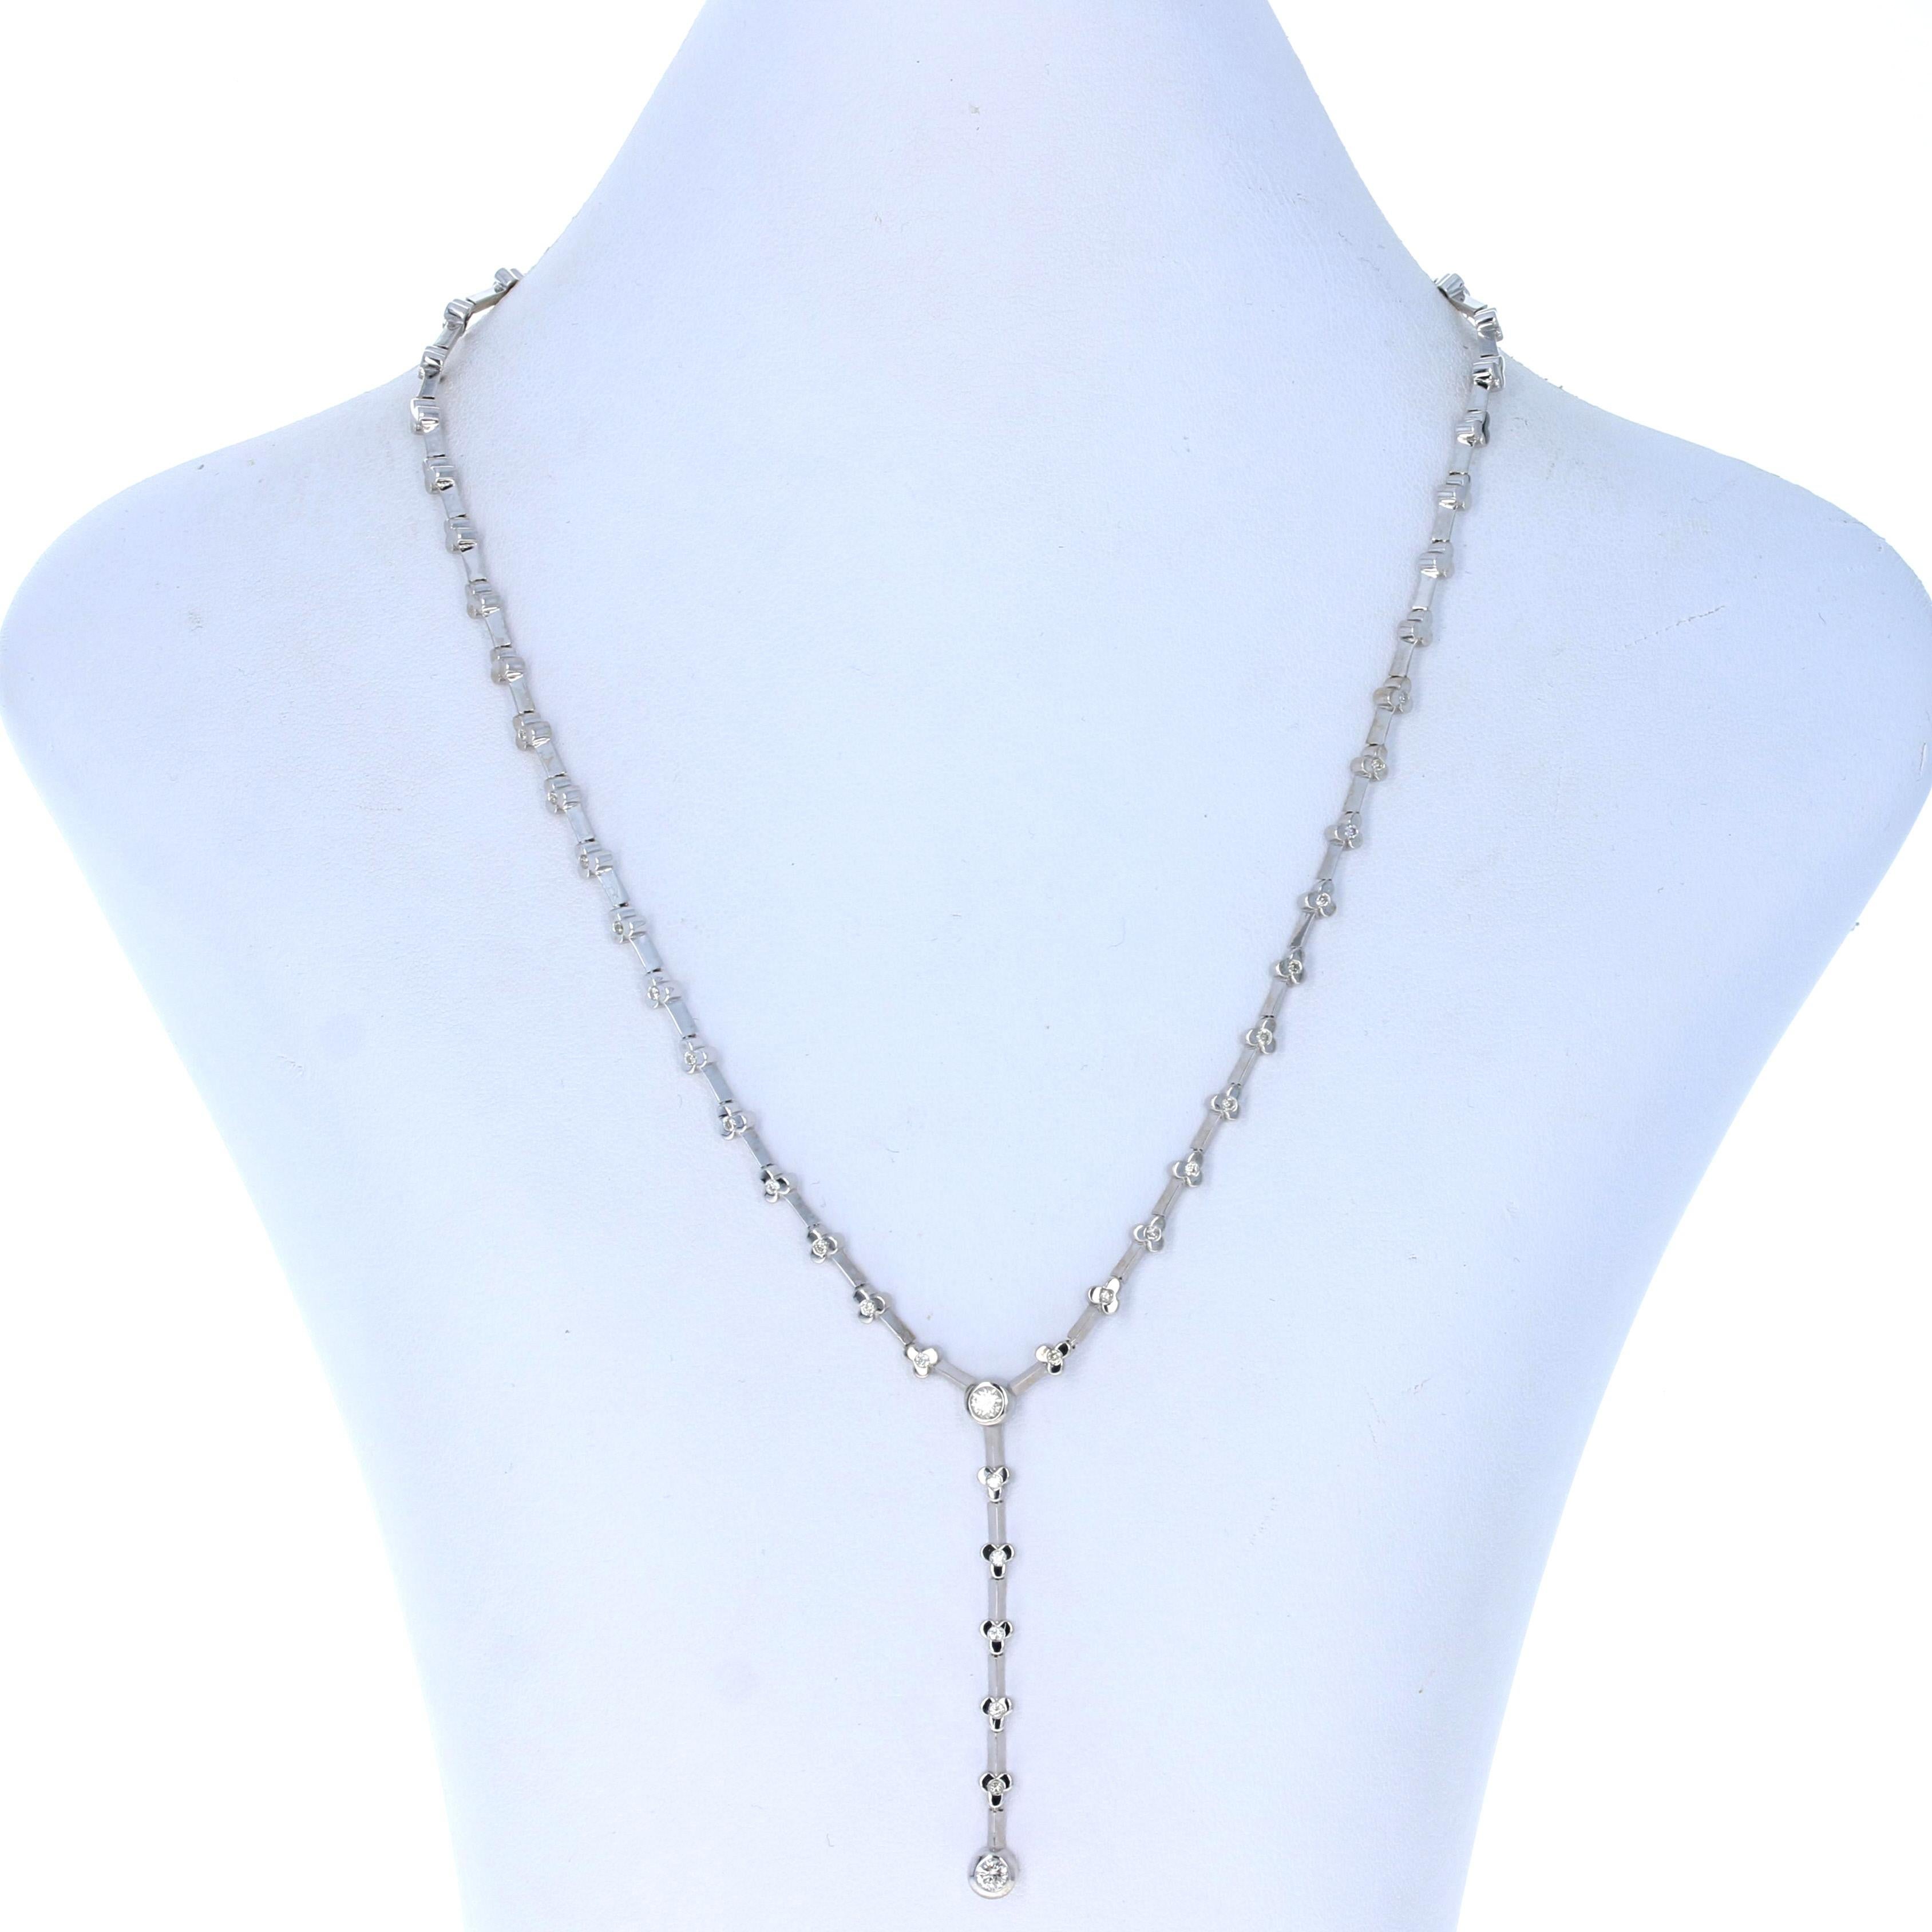 Metal Content: 18k White Gold  

Stone Information: 
Natural Diamonds
Total Carats: .75ctw
Cut: Round Brilliant 
Color: I - J   
Clarity: VS1 - VS2 

Necklace Style: Lariat 
Chain Style: Fancy Link
Closure Type: Tab Box Clasp with Side Safety